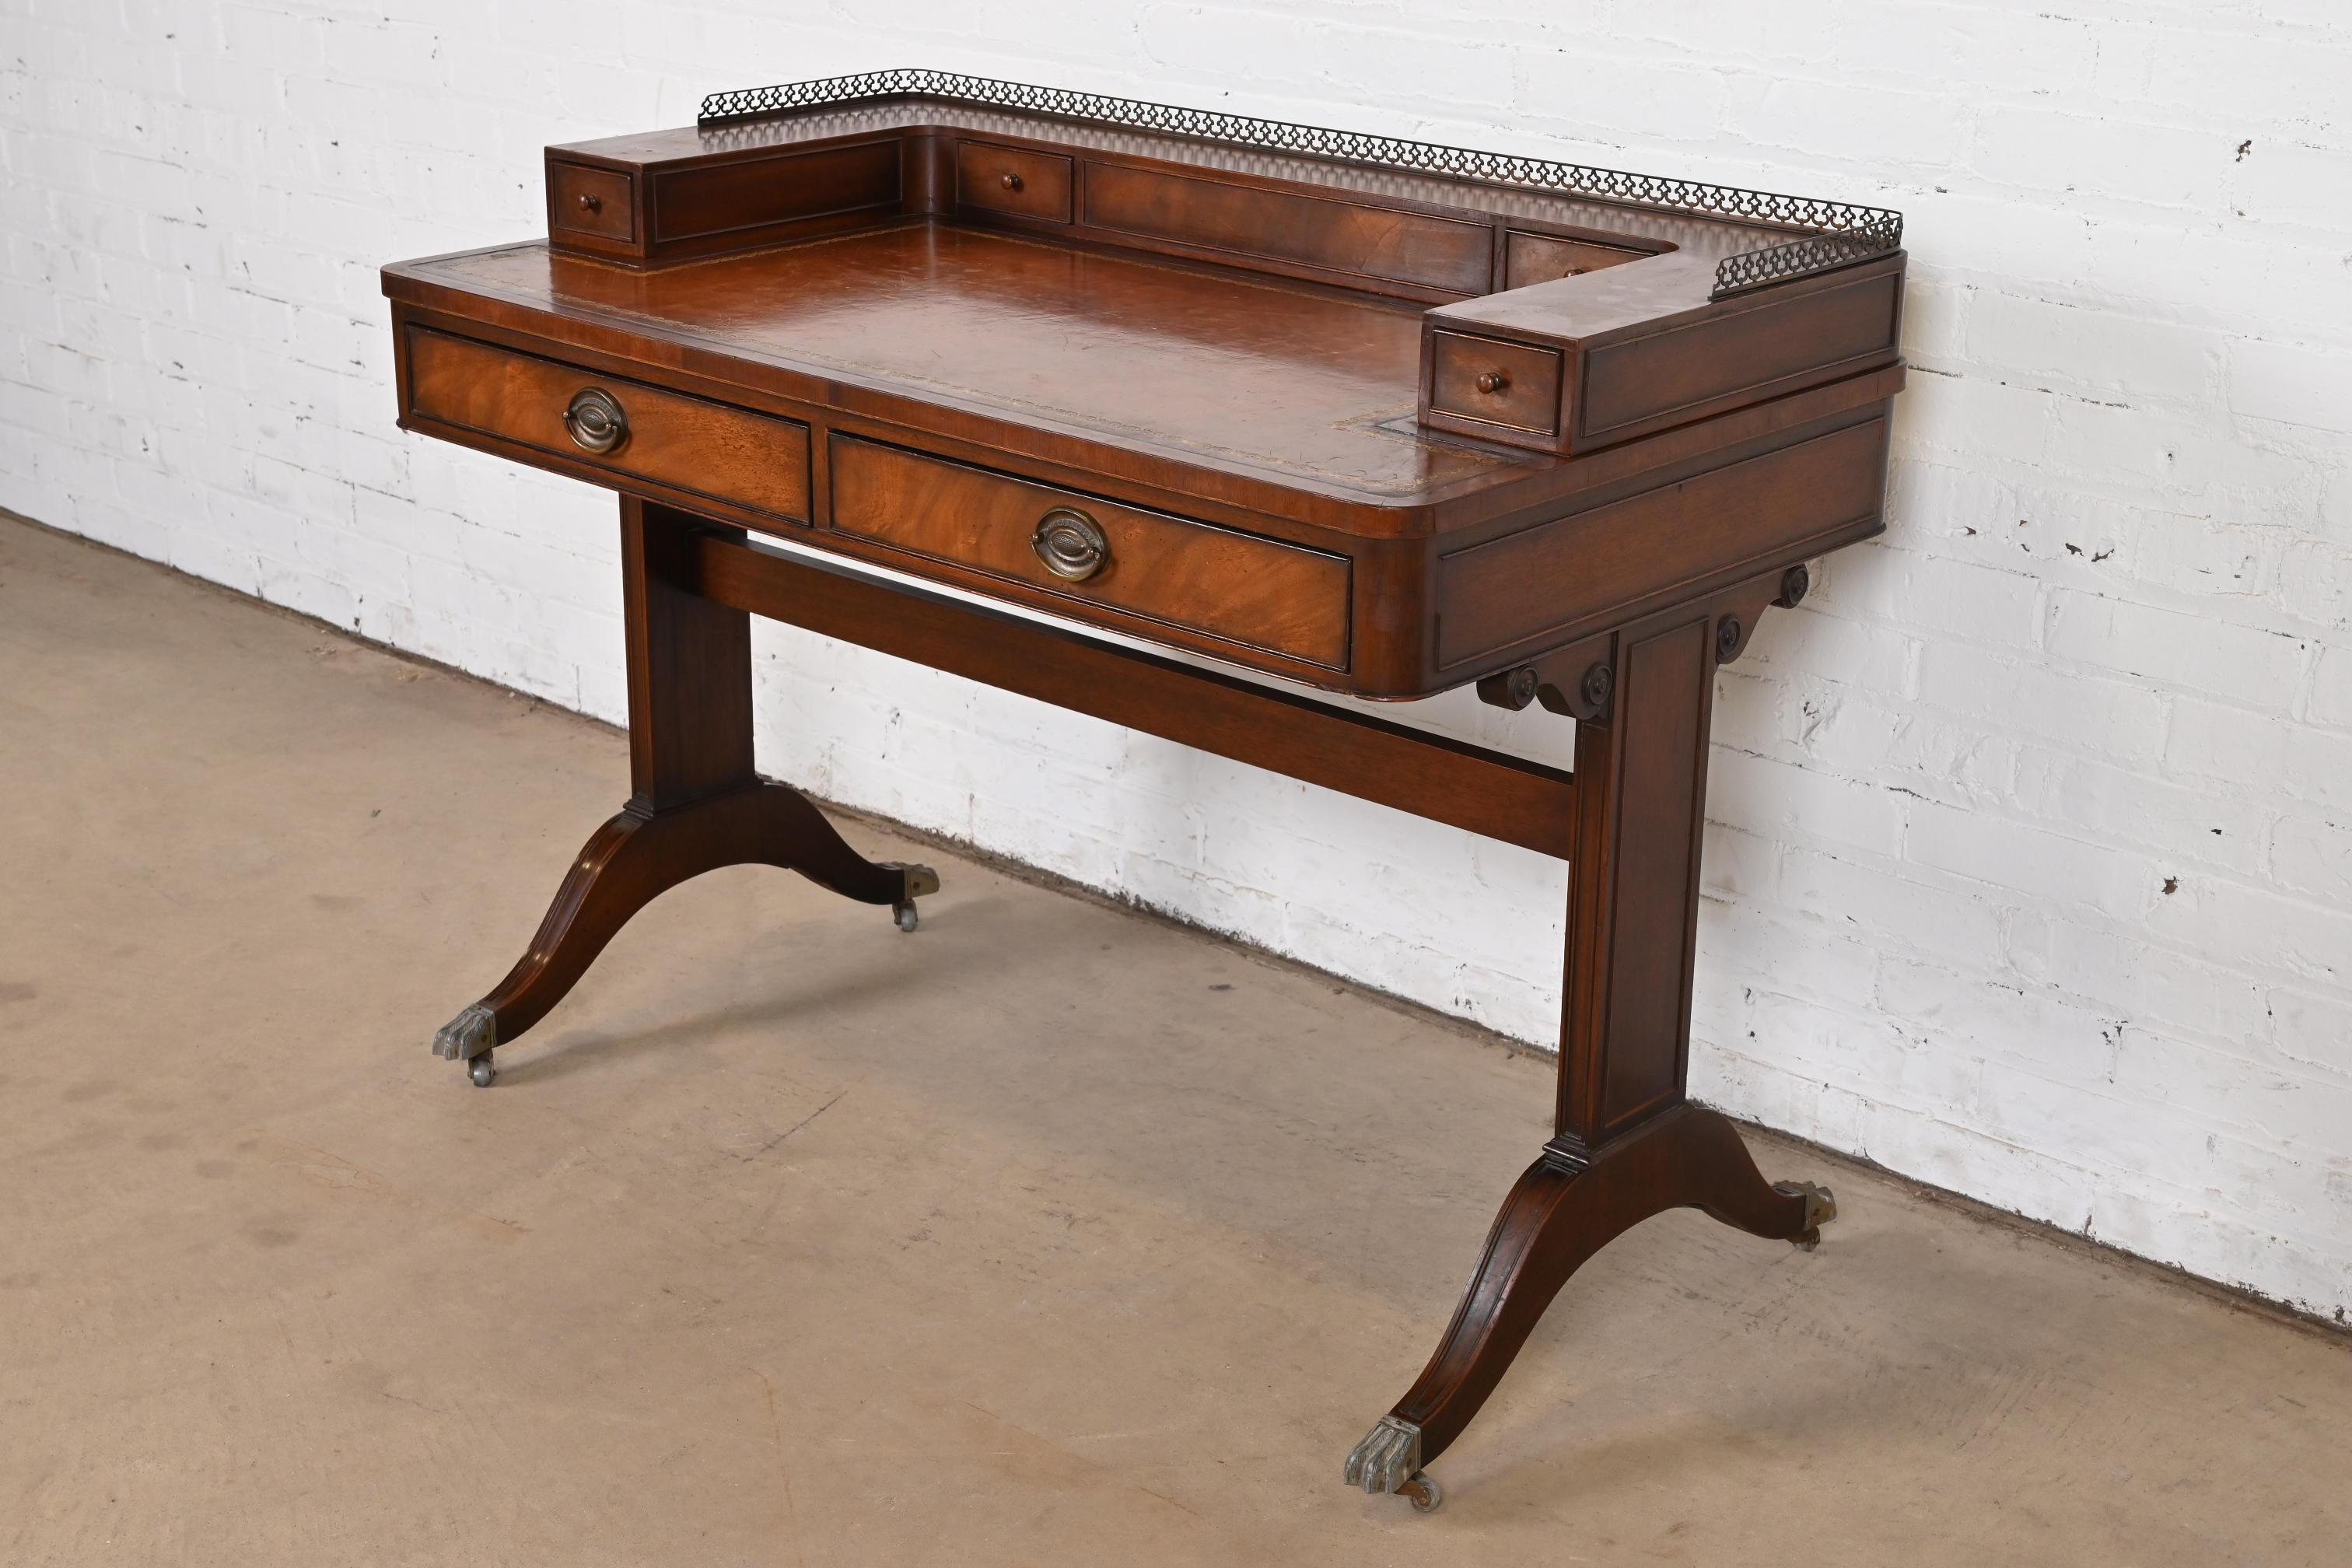 Baker Furniture English Regency Mahogany Leather Top Writing Desk In Good Condition For Sale In South Bend, IN